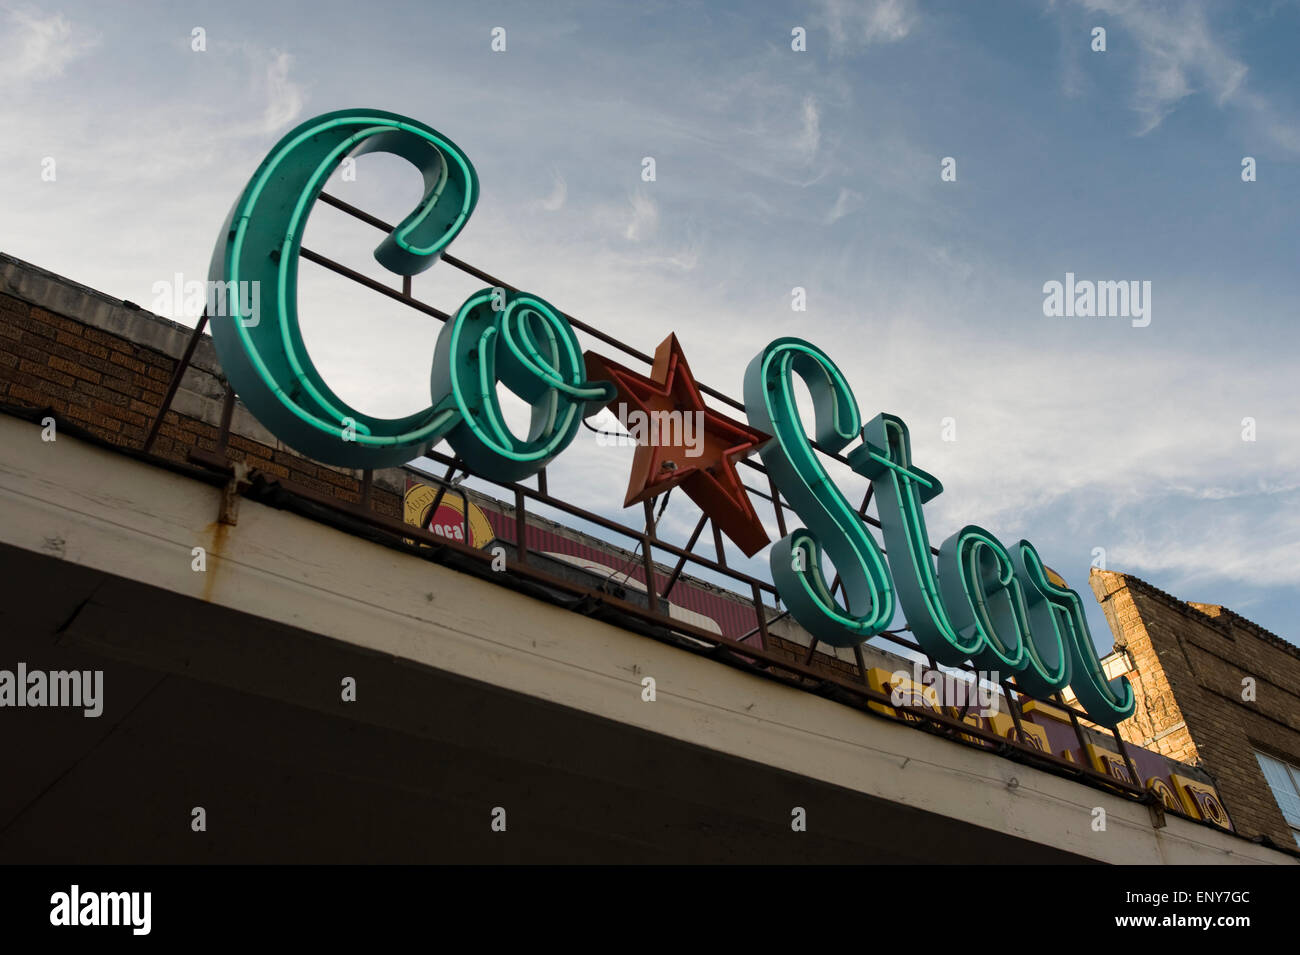 Neon sign of Co*Star, a boutique located in SoCo (South Congress) section of Austin TX Stock Photo